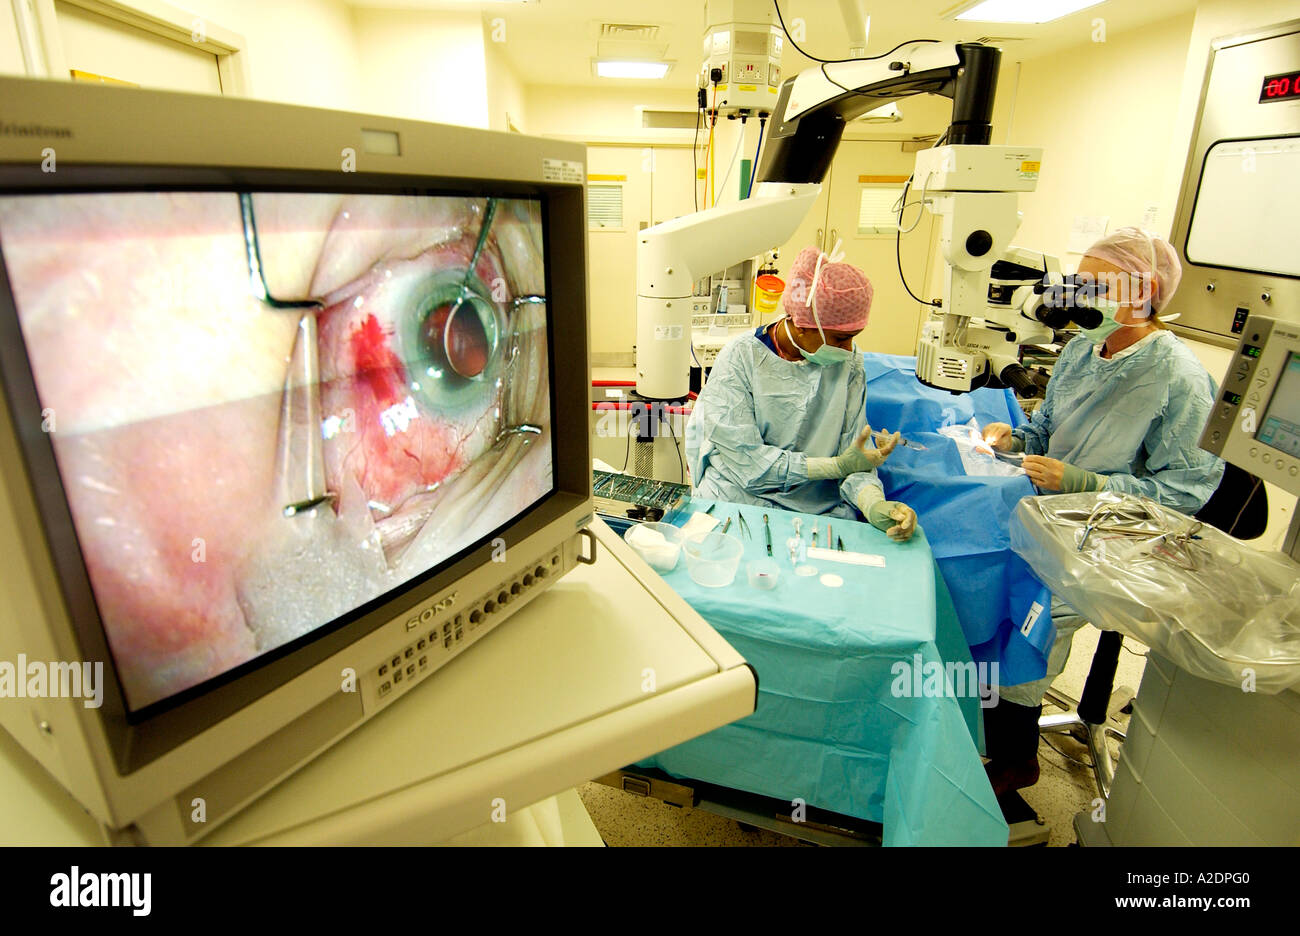 How do you find doctors that offer cataract operations for free?